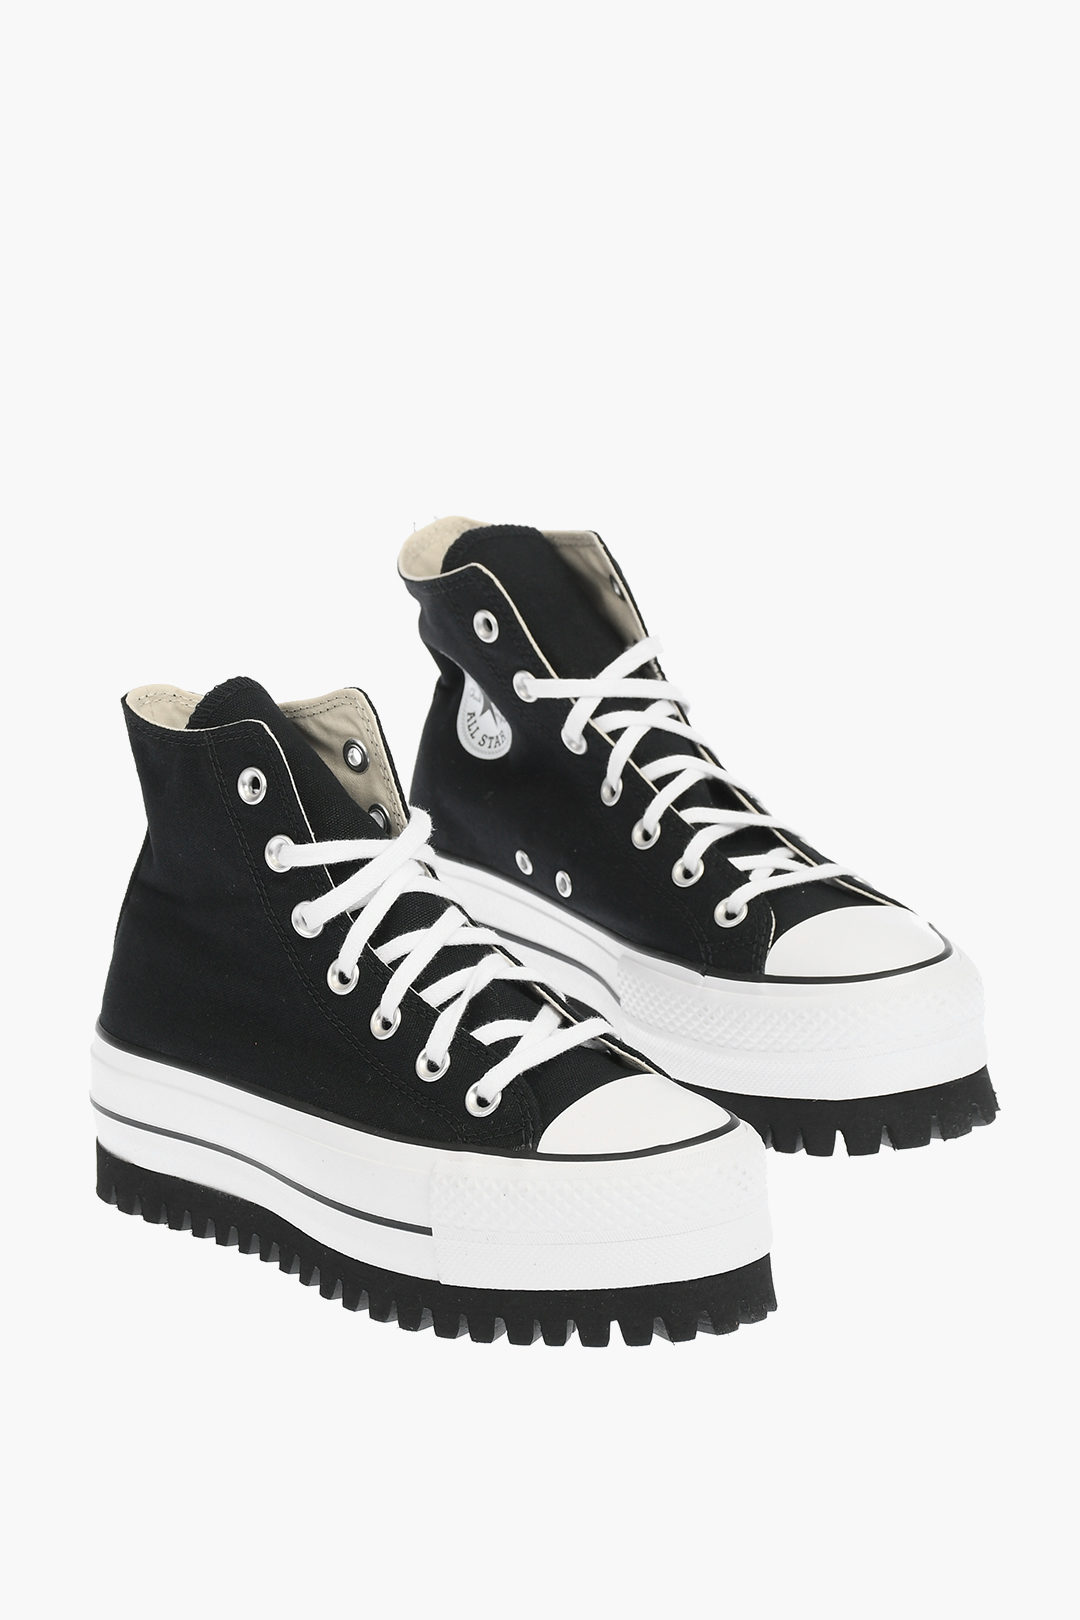 Converse ALL STAR CHUCK TAYLOR 4cm contrasting sole high-top Sneakers with Platform  women - Glamood Outlet